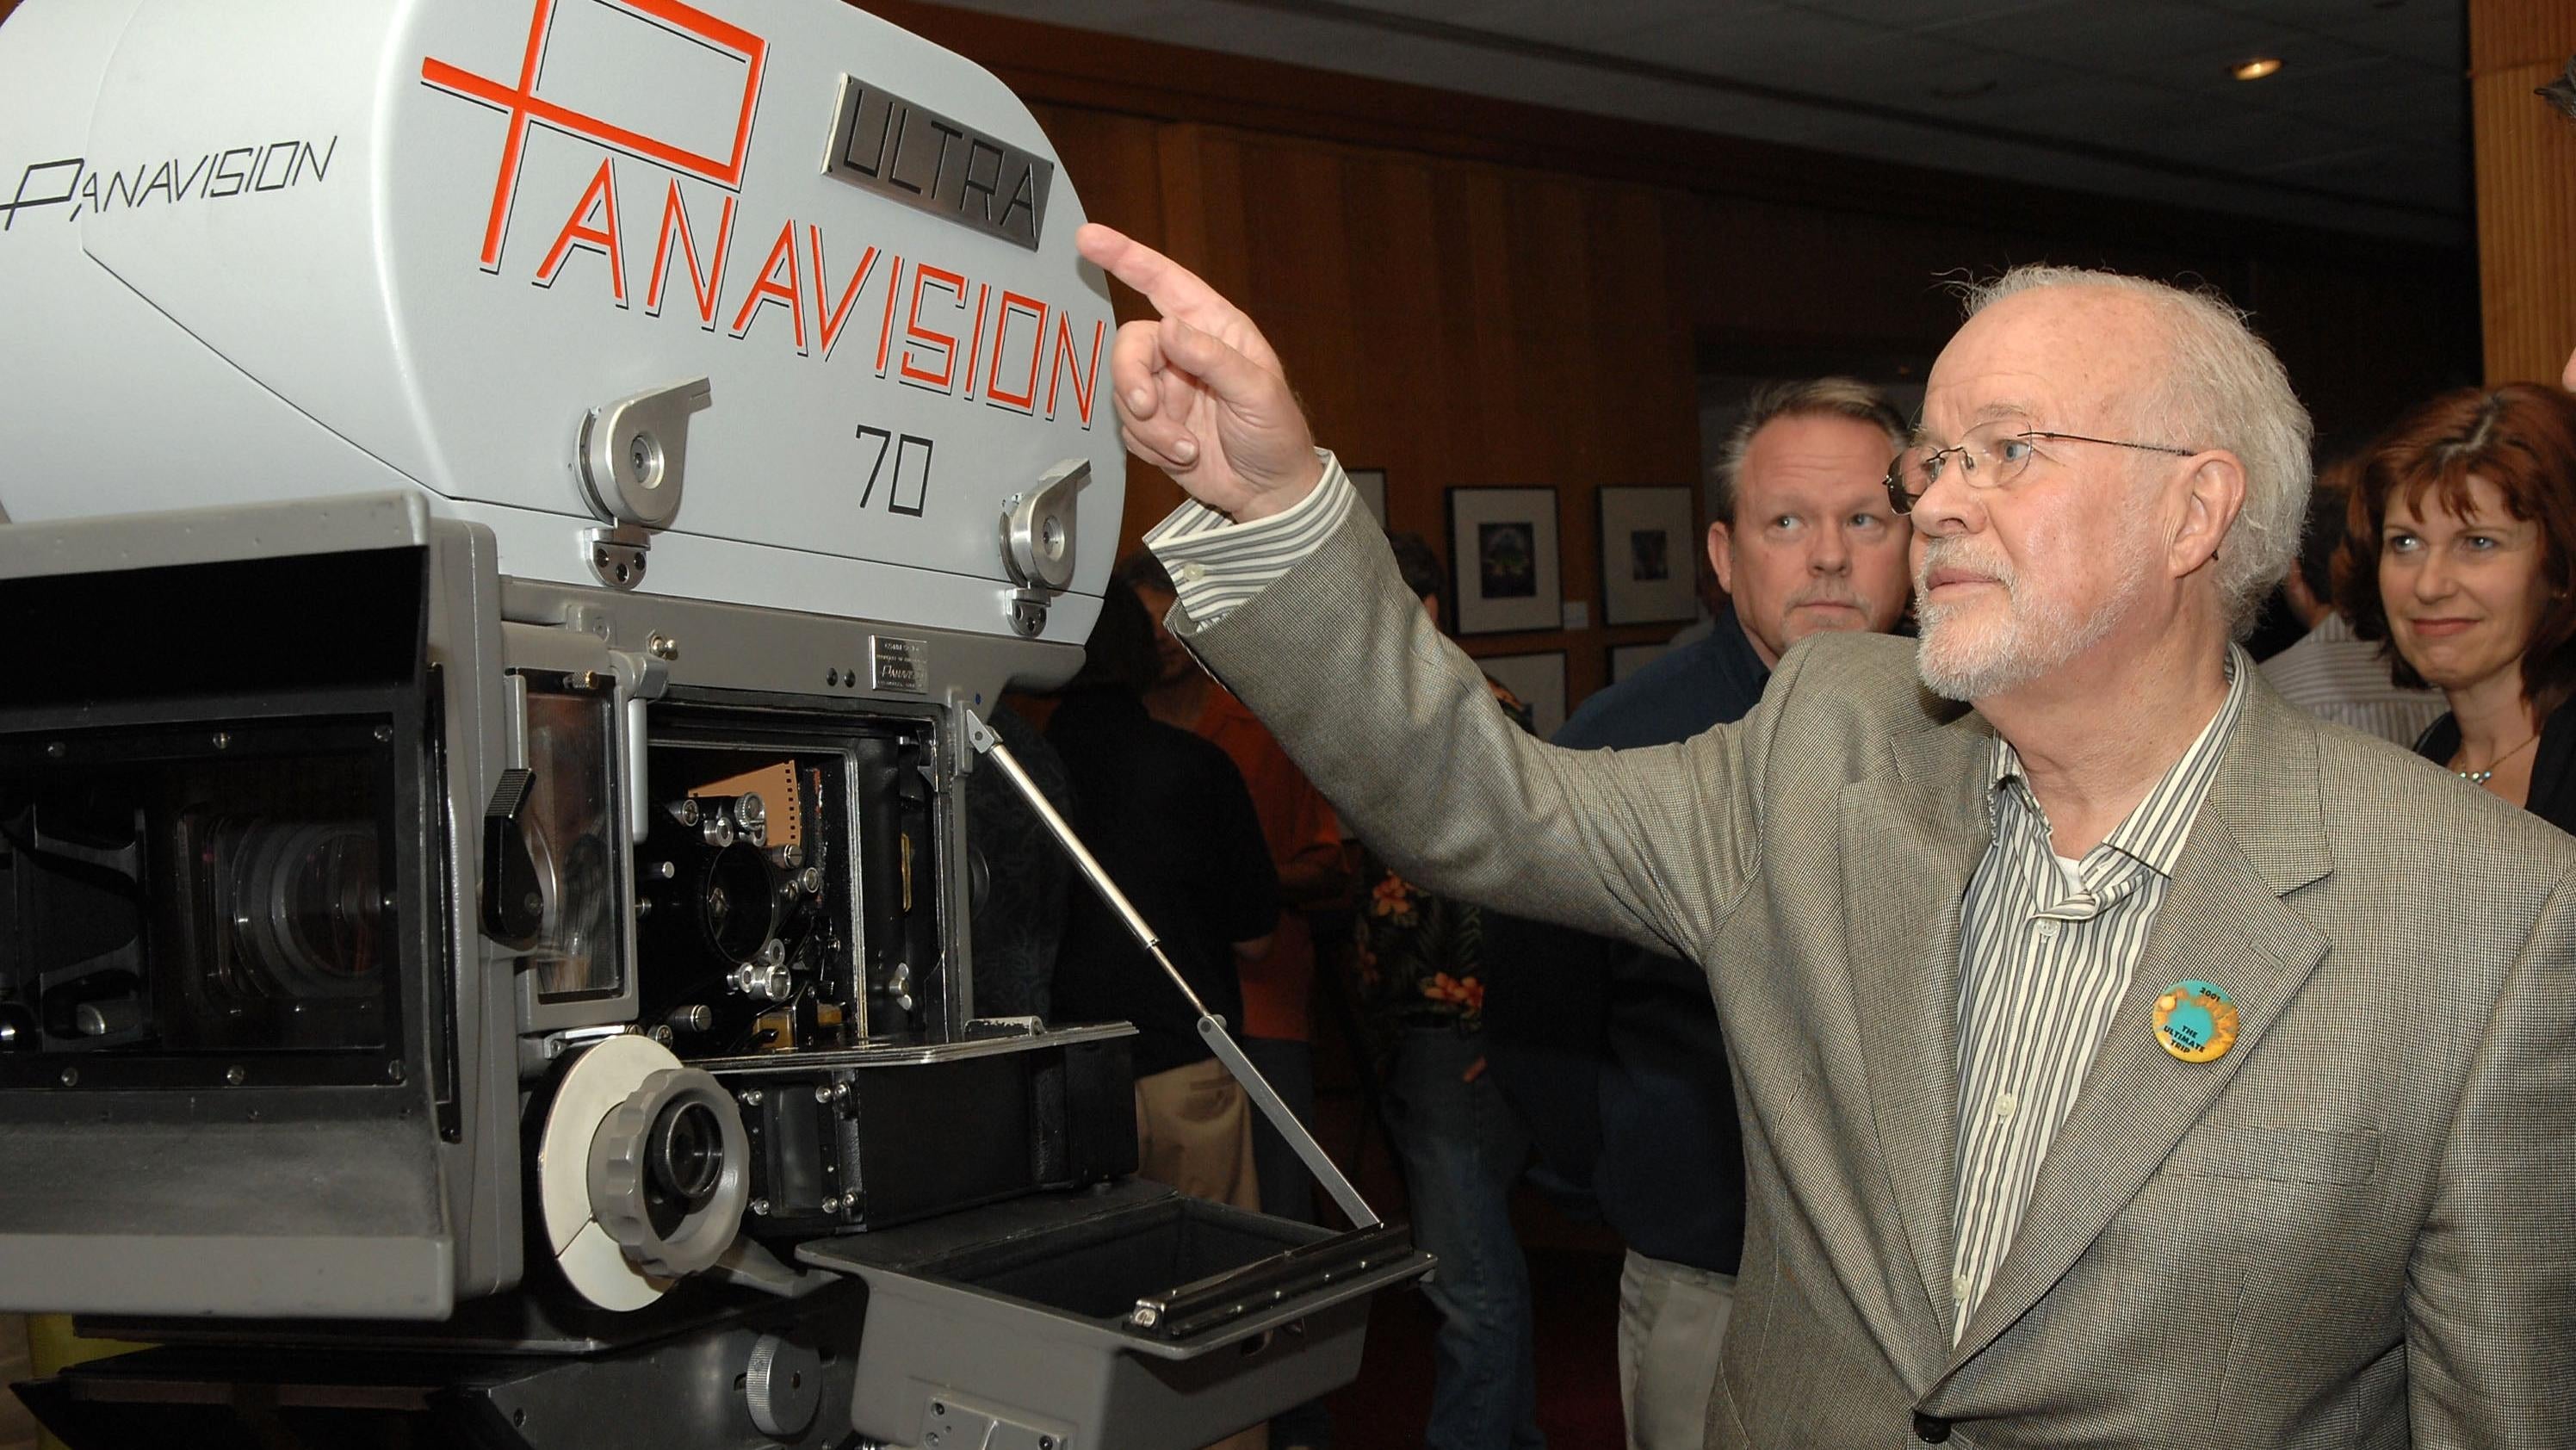 Douglas Trumbull attends a presentation by AMPAS of the making of 2001: A Space Odyssey at the Academy of Motion Picture Arts and Sciences May 21, 2008 in Beverly Hills, California. (Photo: Stephen Shugerman, Getty Images)